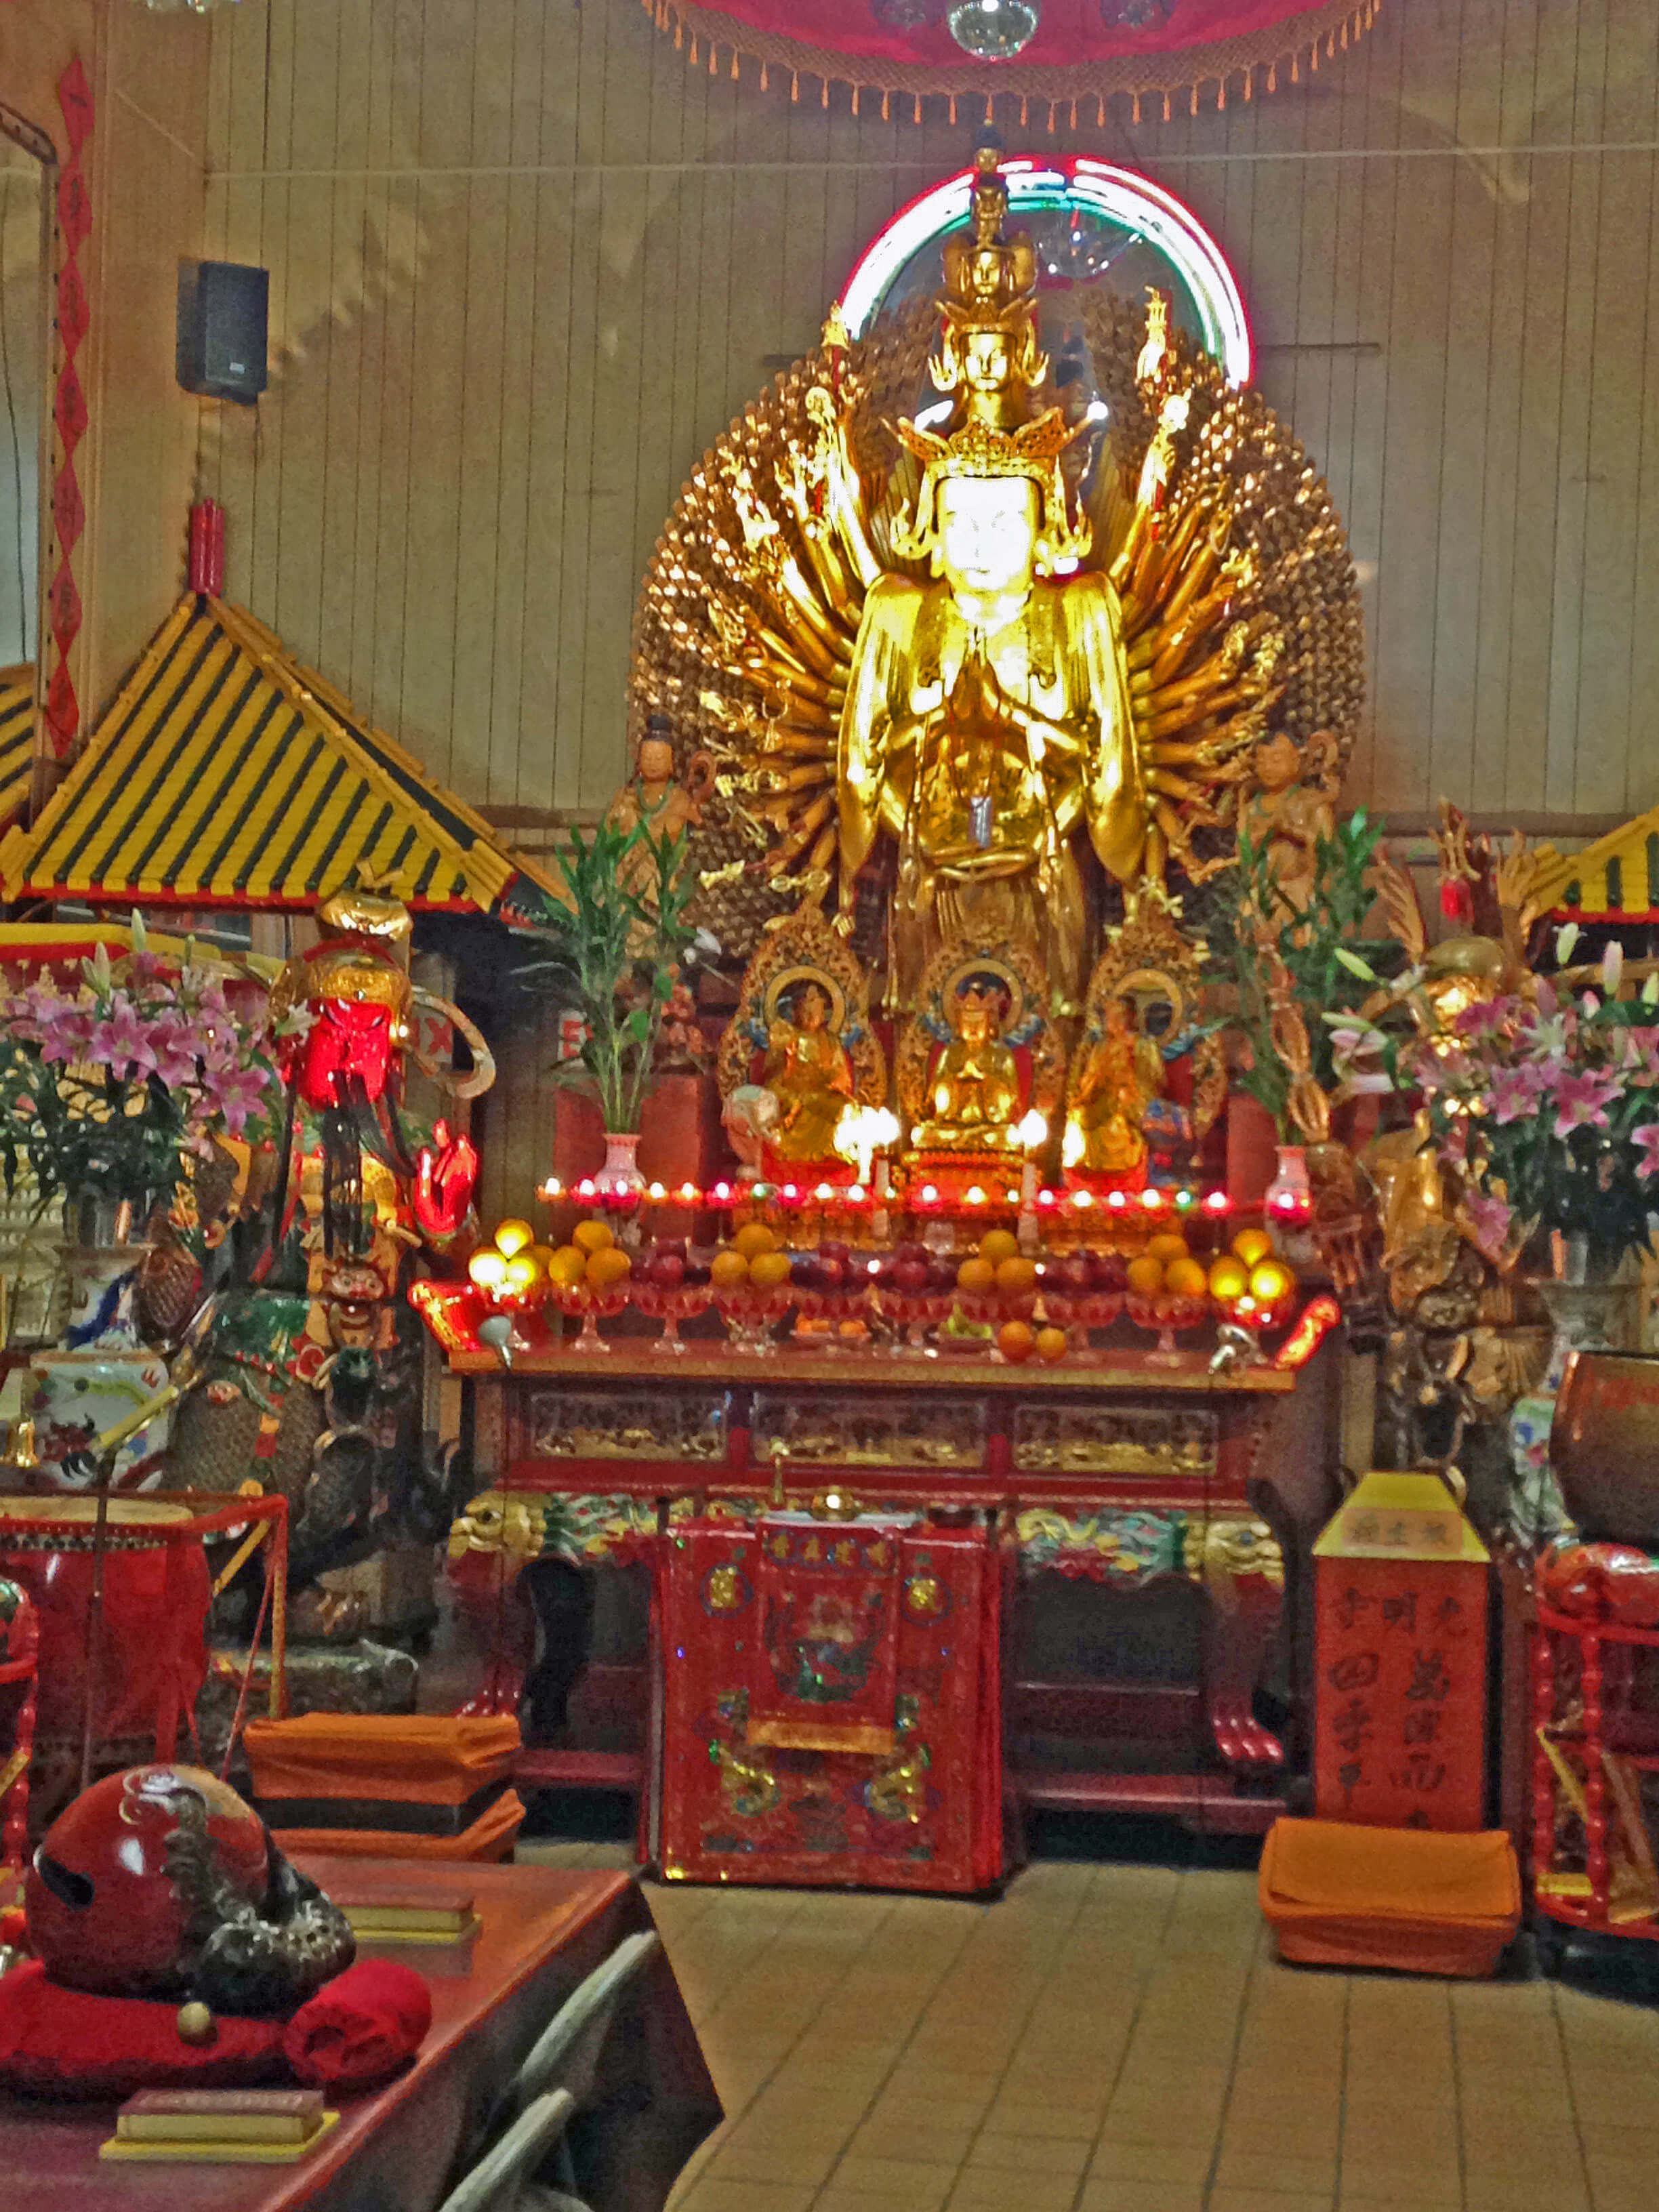 Statue of Thousand-Hand, Thousand-Eye Great Compassion Avalokiteśvara Bodhisattva located in New York's Guang Ming Temple